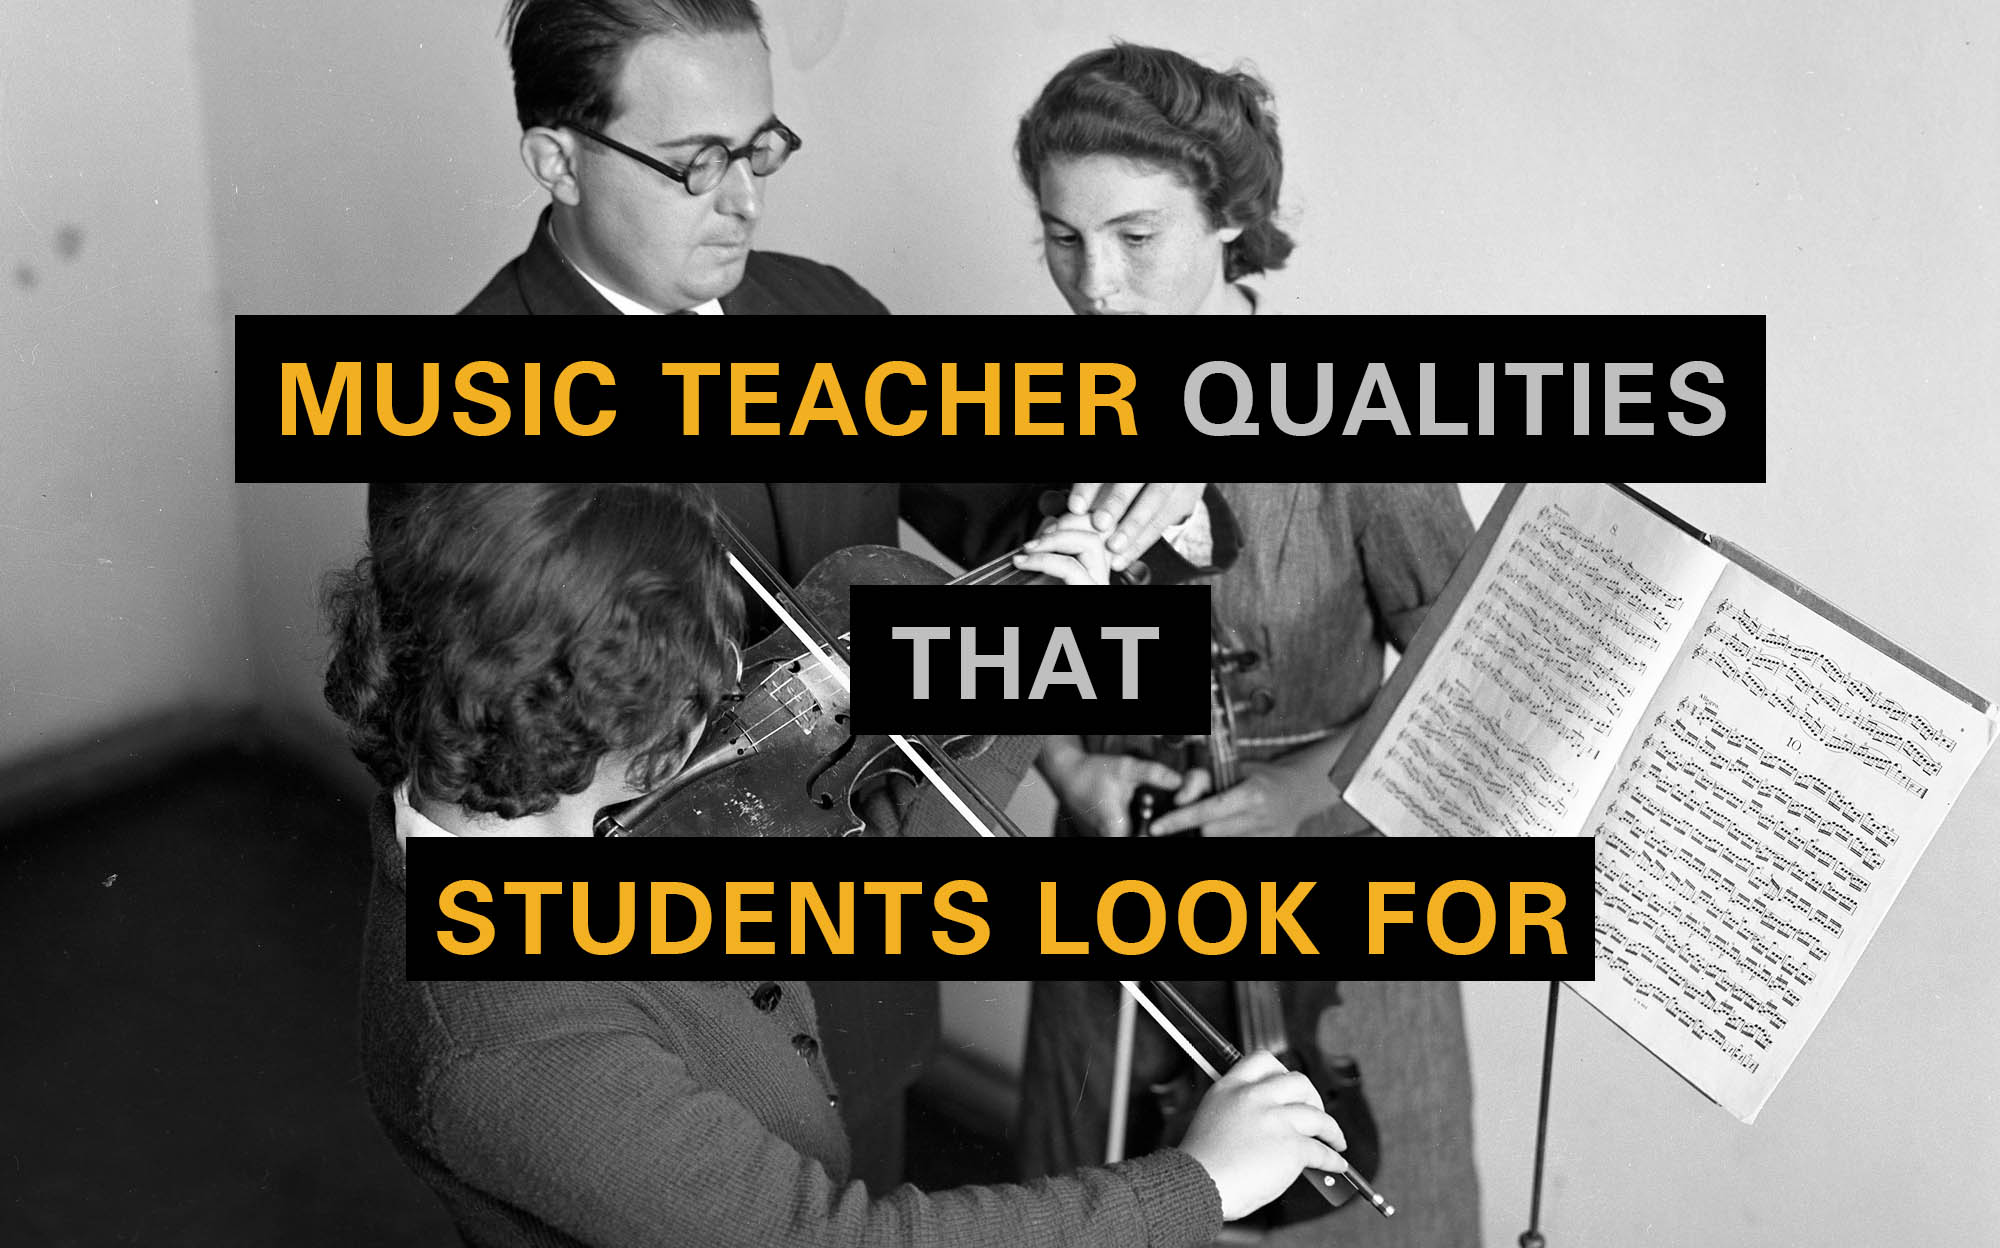 Music Teacher Qualities that Students Look for